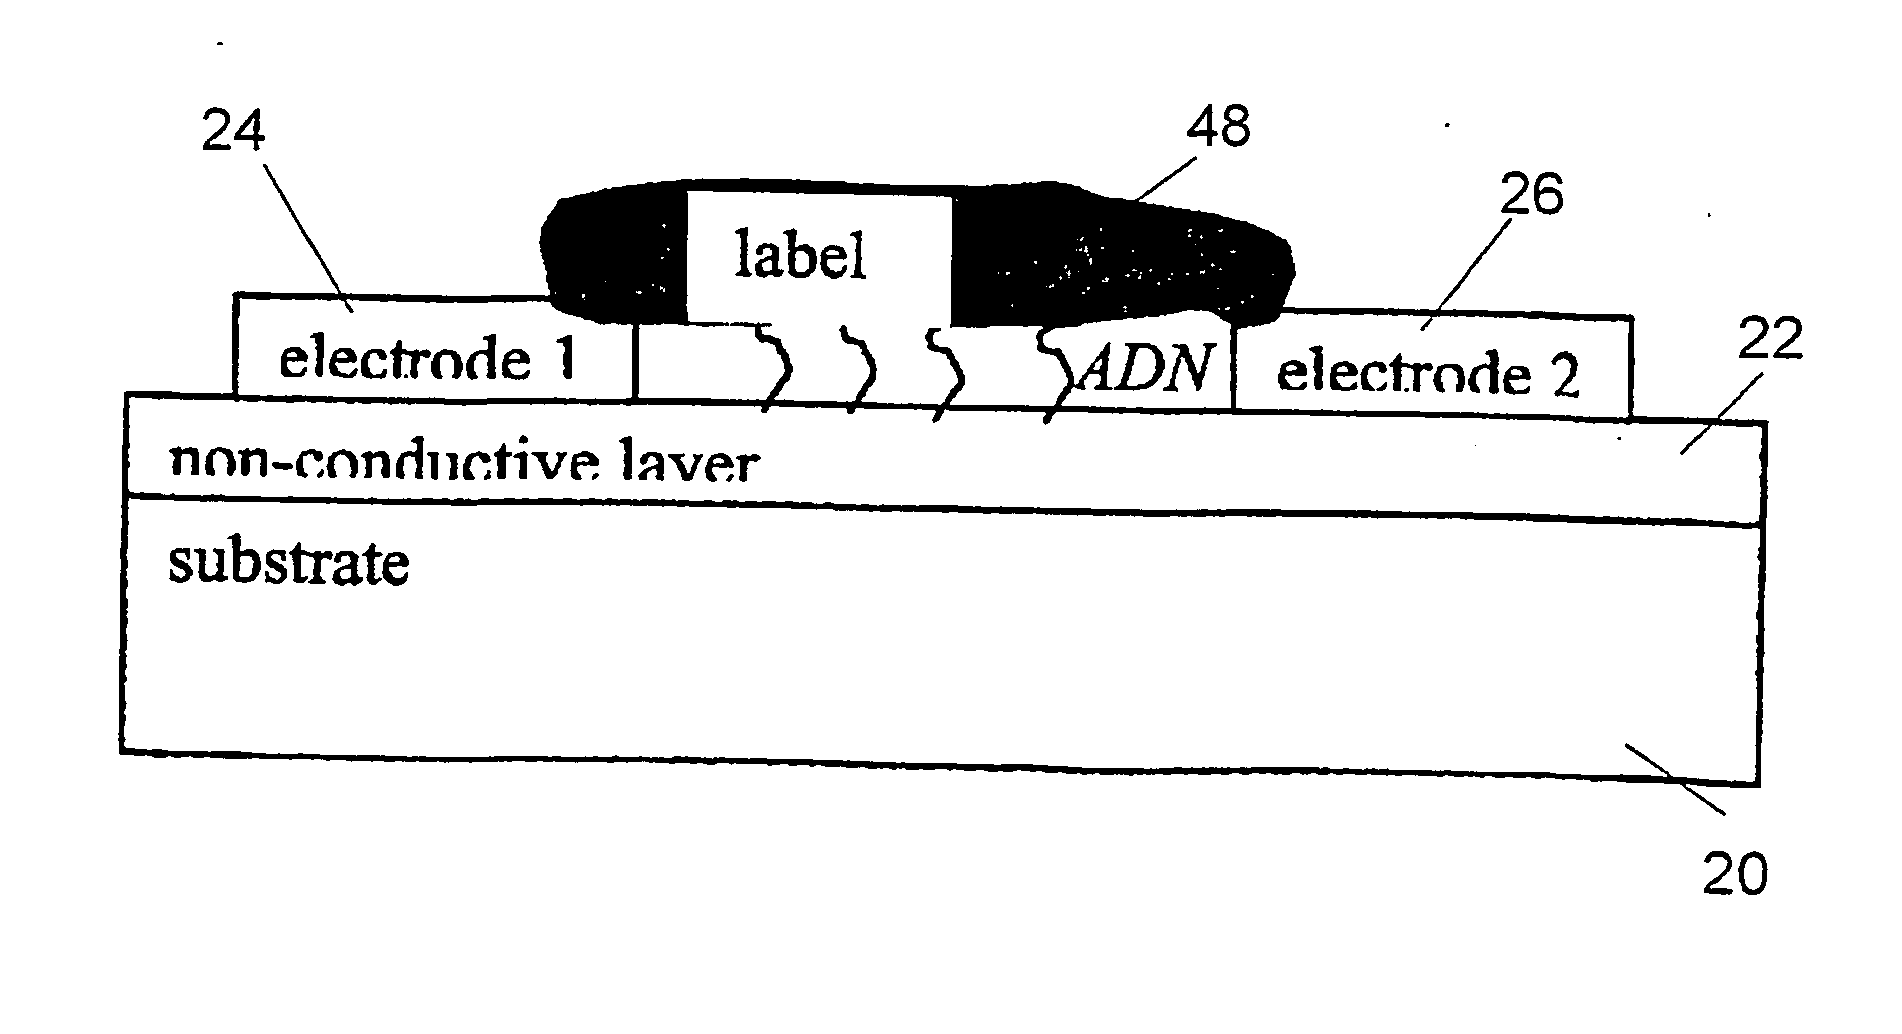 Method and device for high sensitivity detection of the presence of dna and other probes